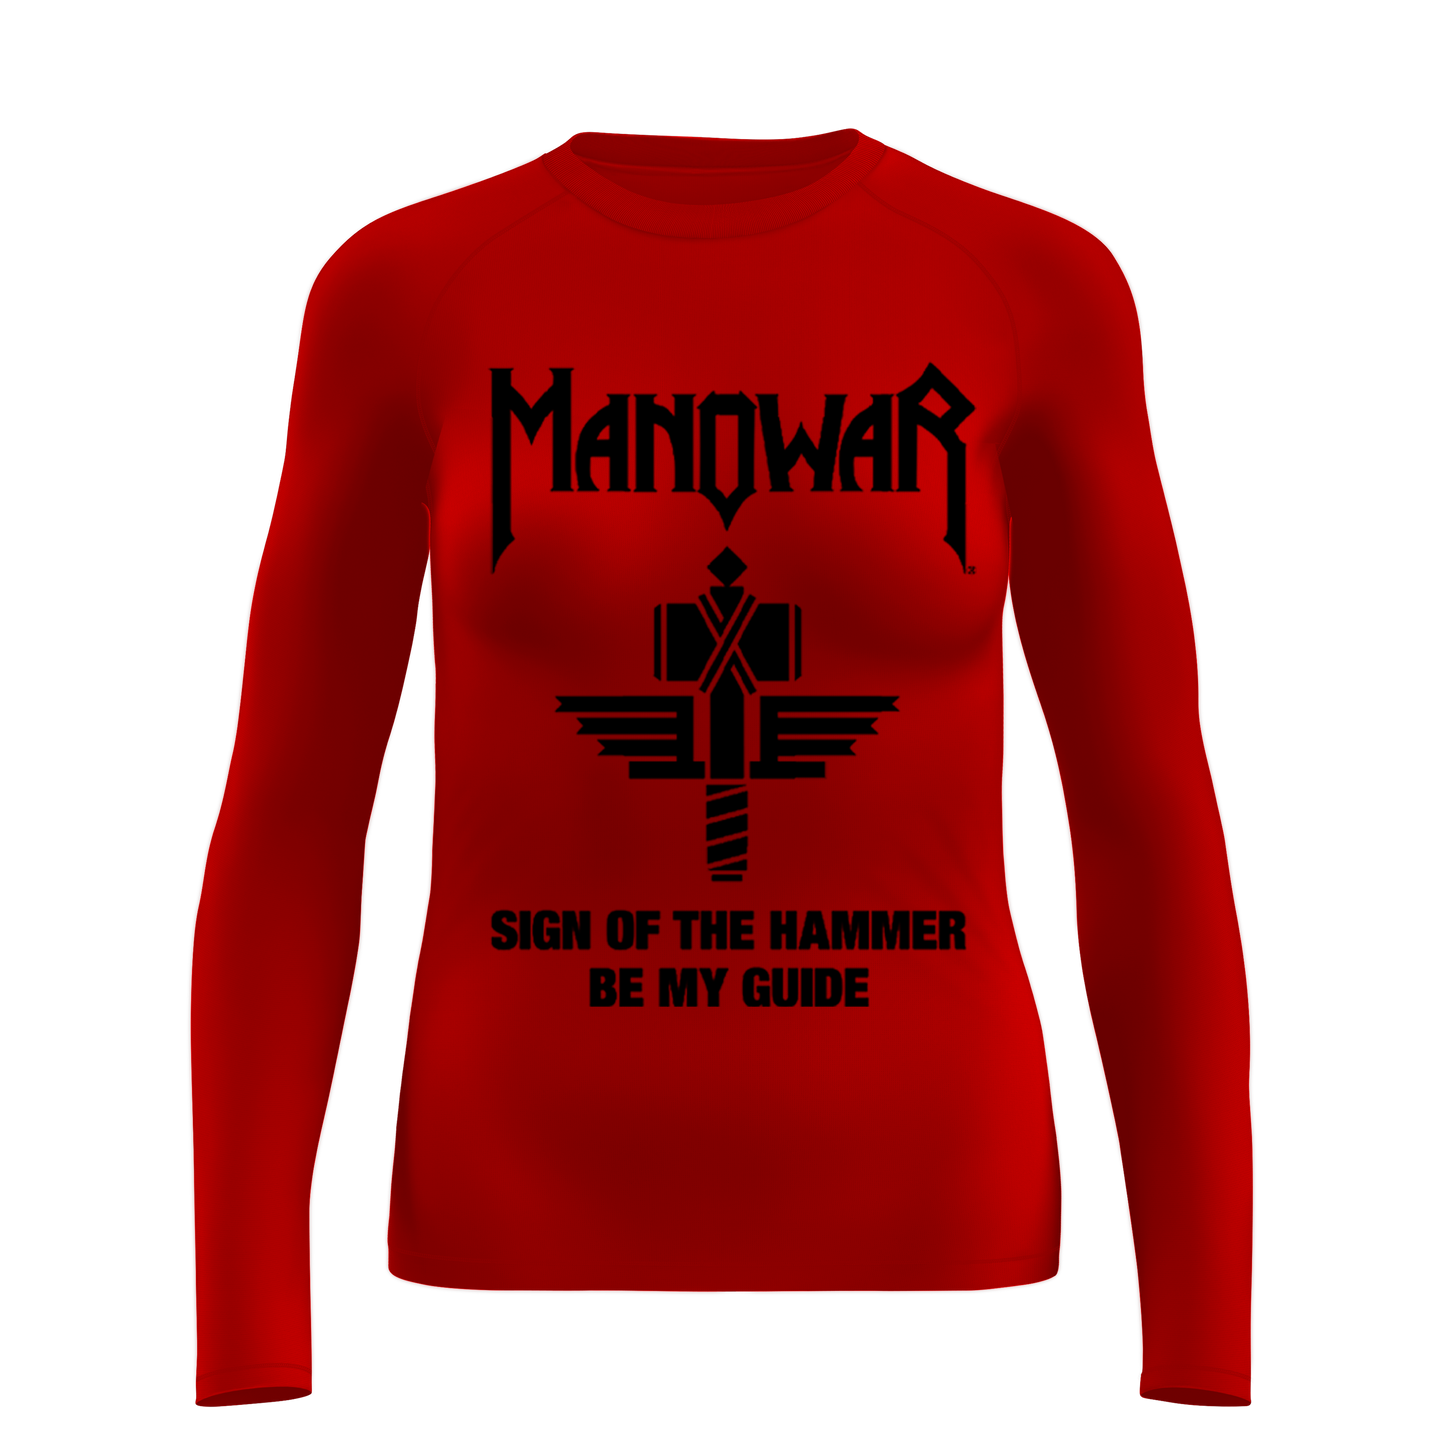 Manowar Ladies Long Sleeve Sign Of The Hammer - red - Ltd. Edition